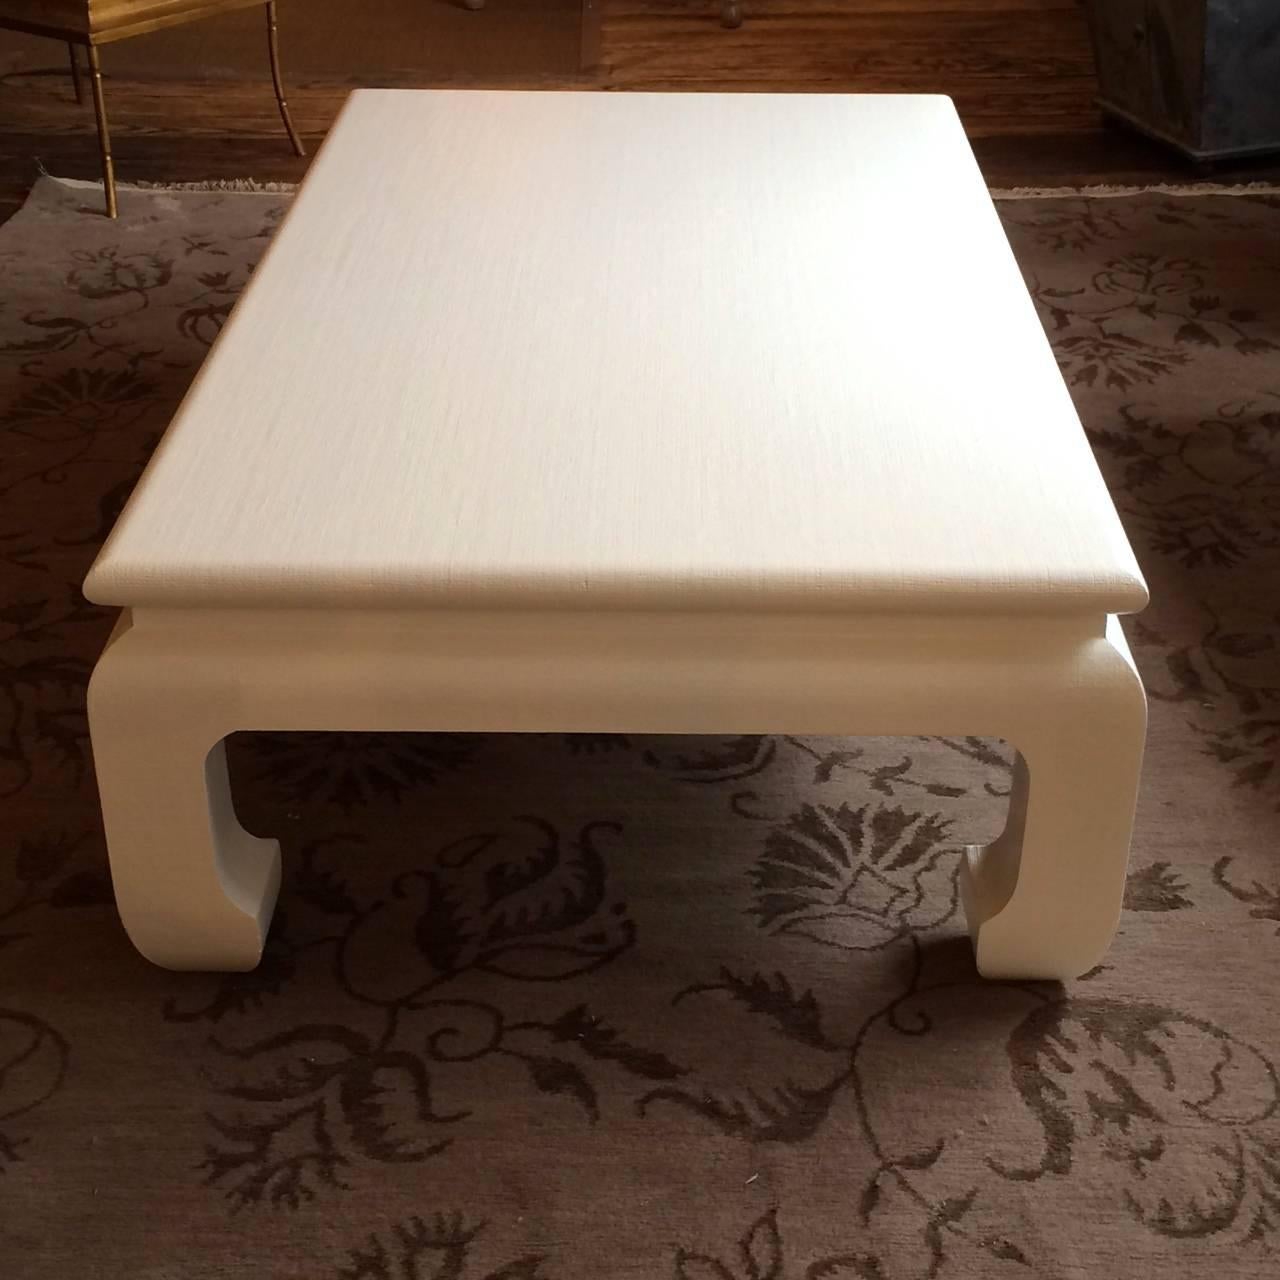 An Asian inspired coffee table attributed to Karl Springer in a white lacquered textile finish. No signature found.